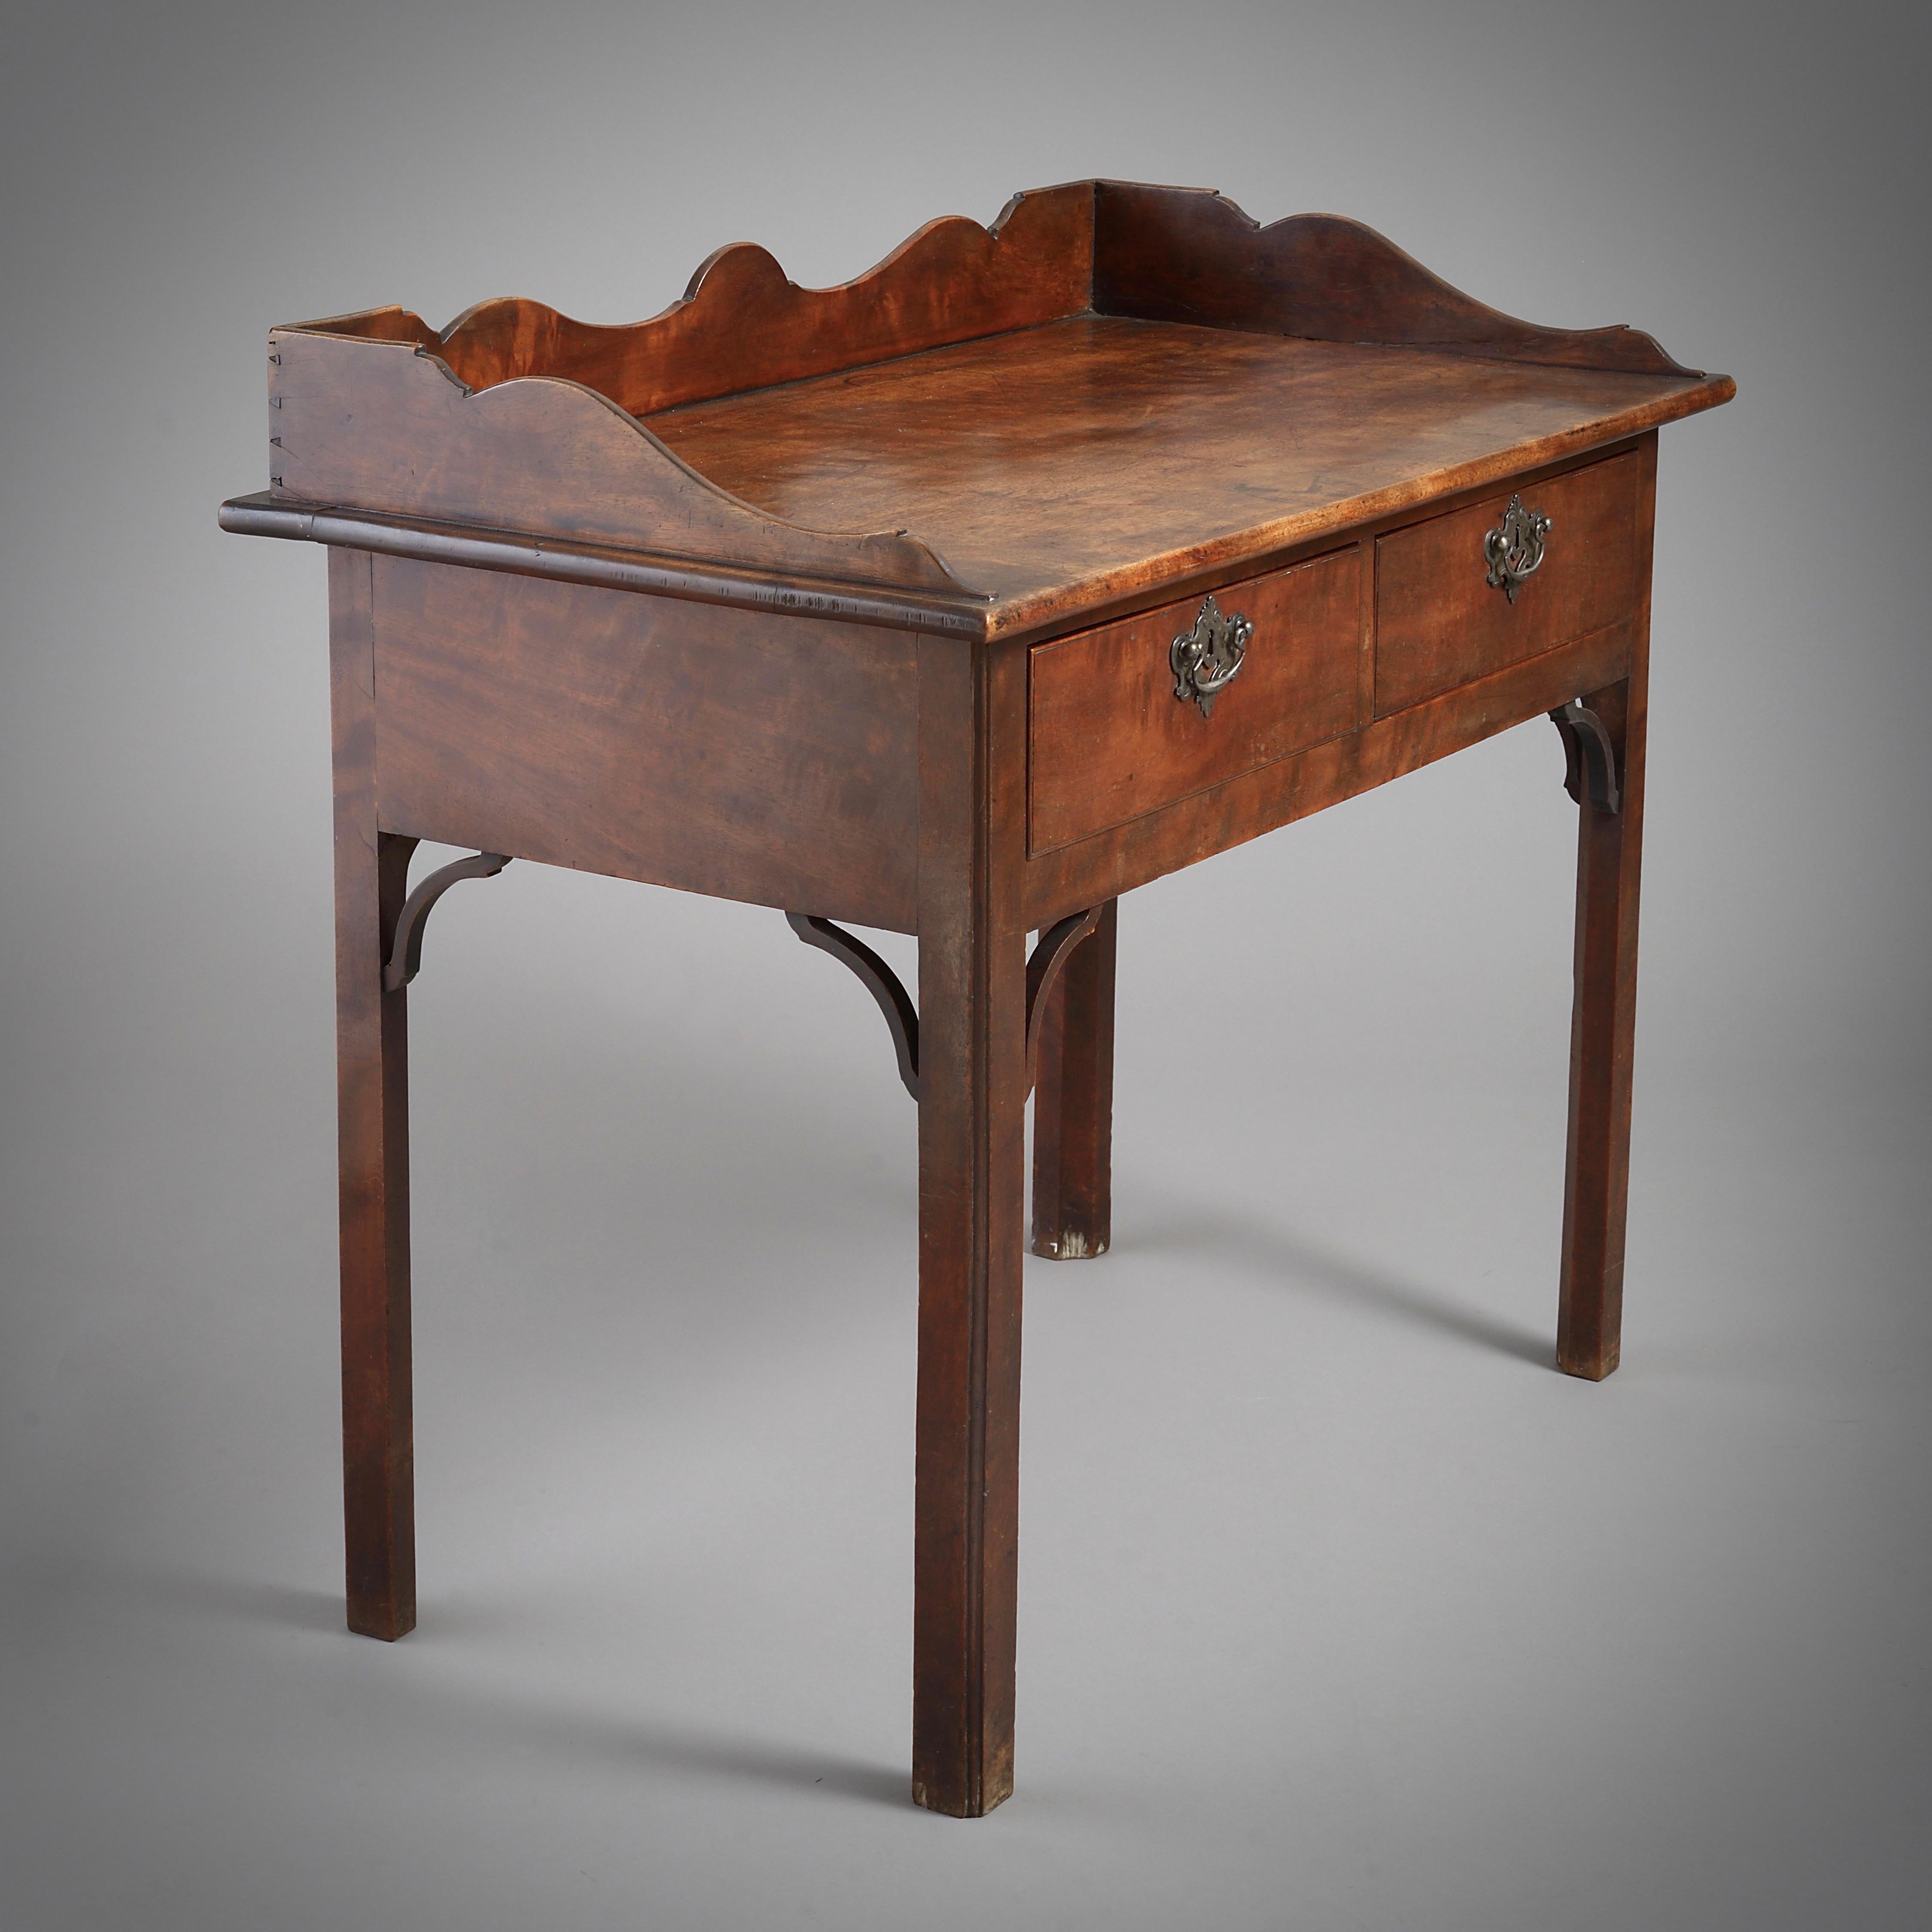 An Anglo-Chinese George III padouk side table, with original paktong handles, circa 1760.

Measures: 34.5 in. (87cm) to top of gallery.